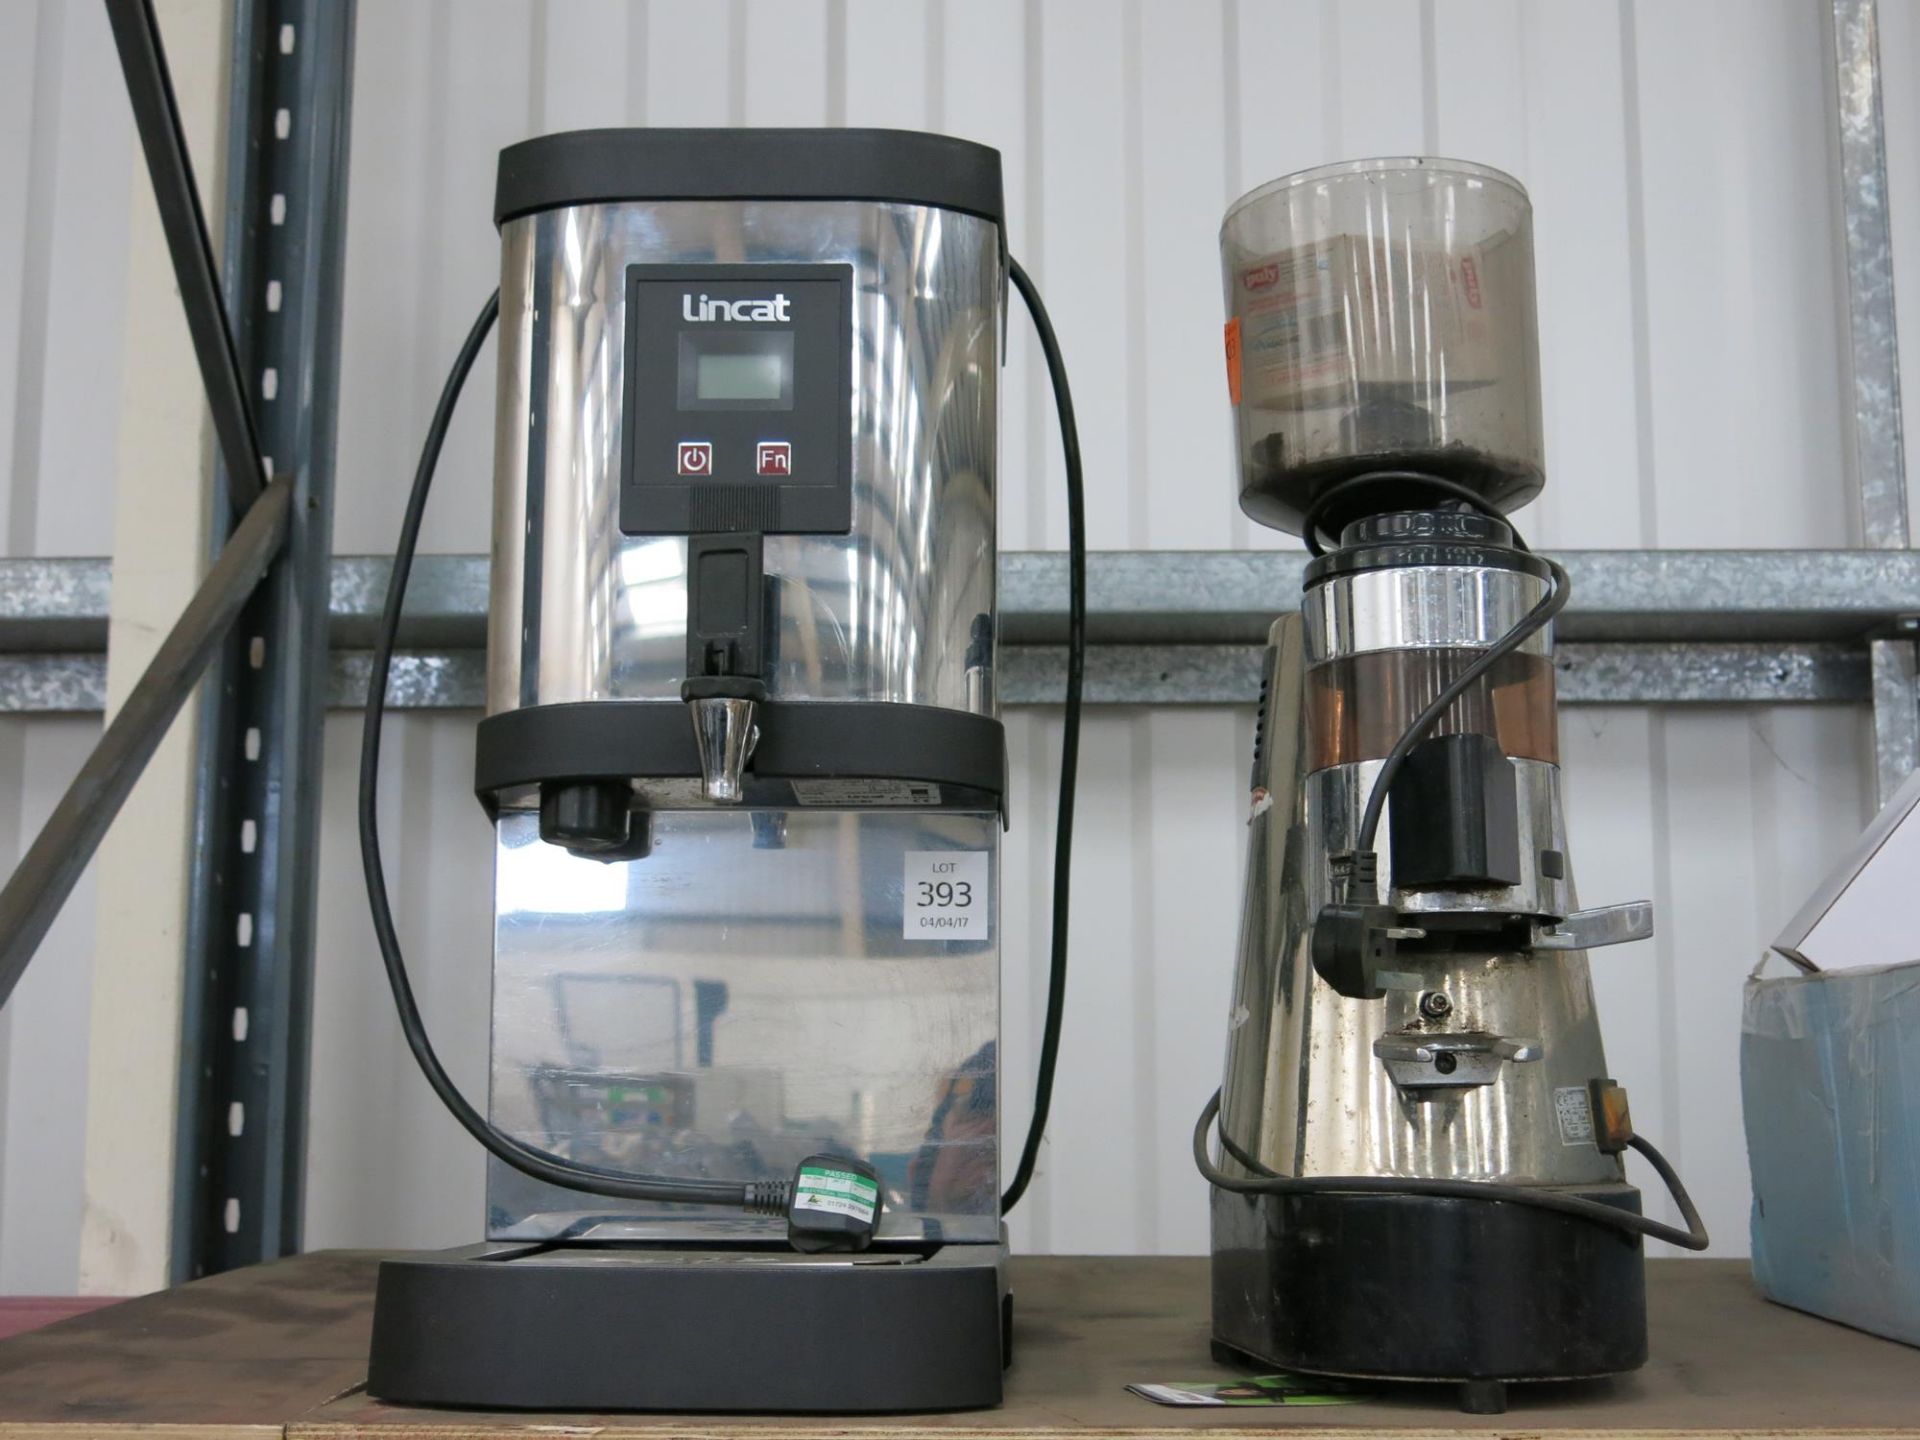 * A Stainless Steel Hot Water Dispenser together with a Stainless Steel Coffee Machine